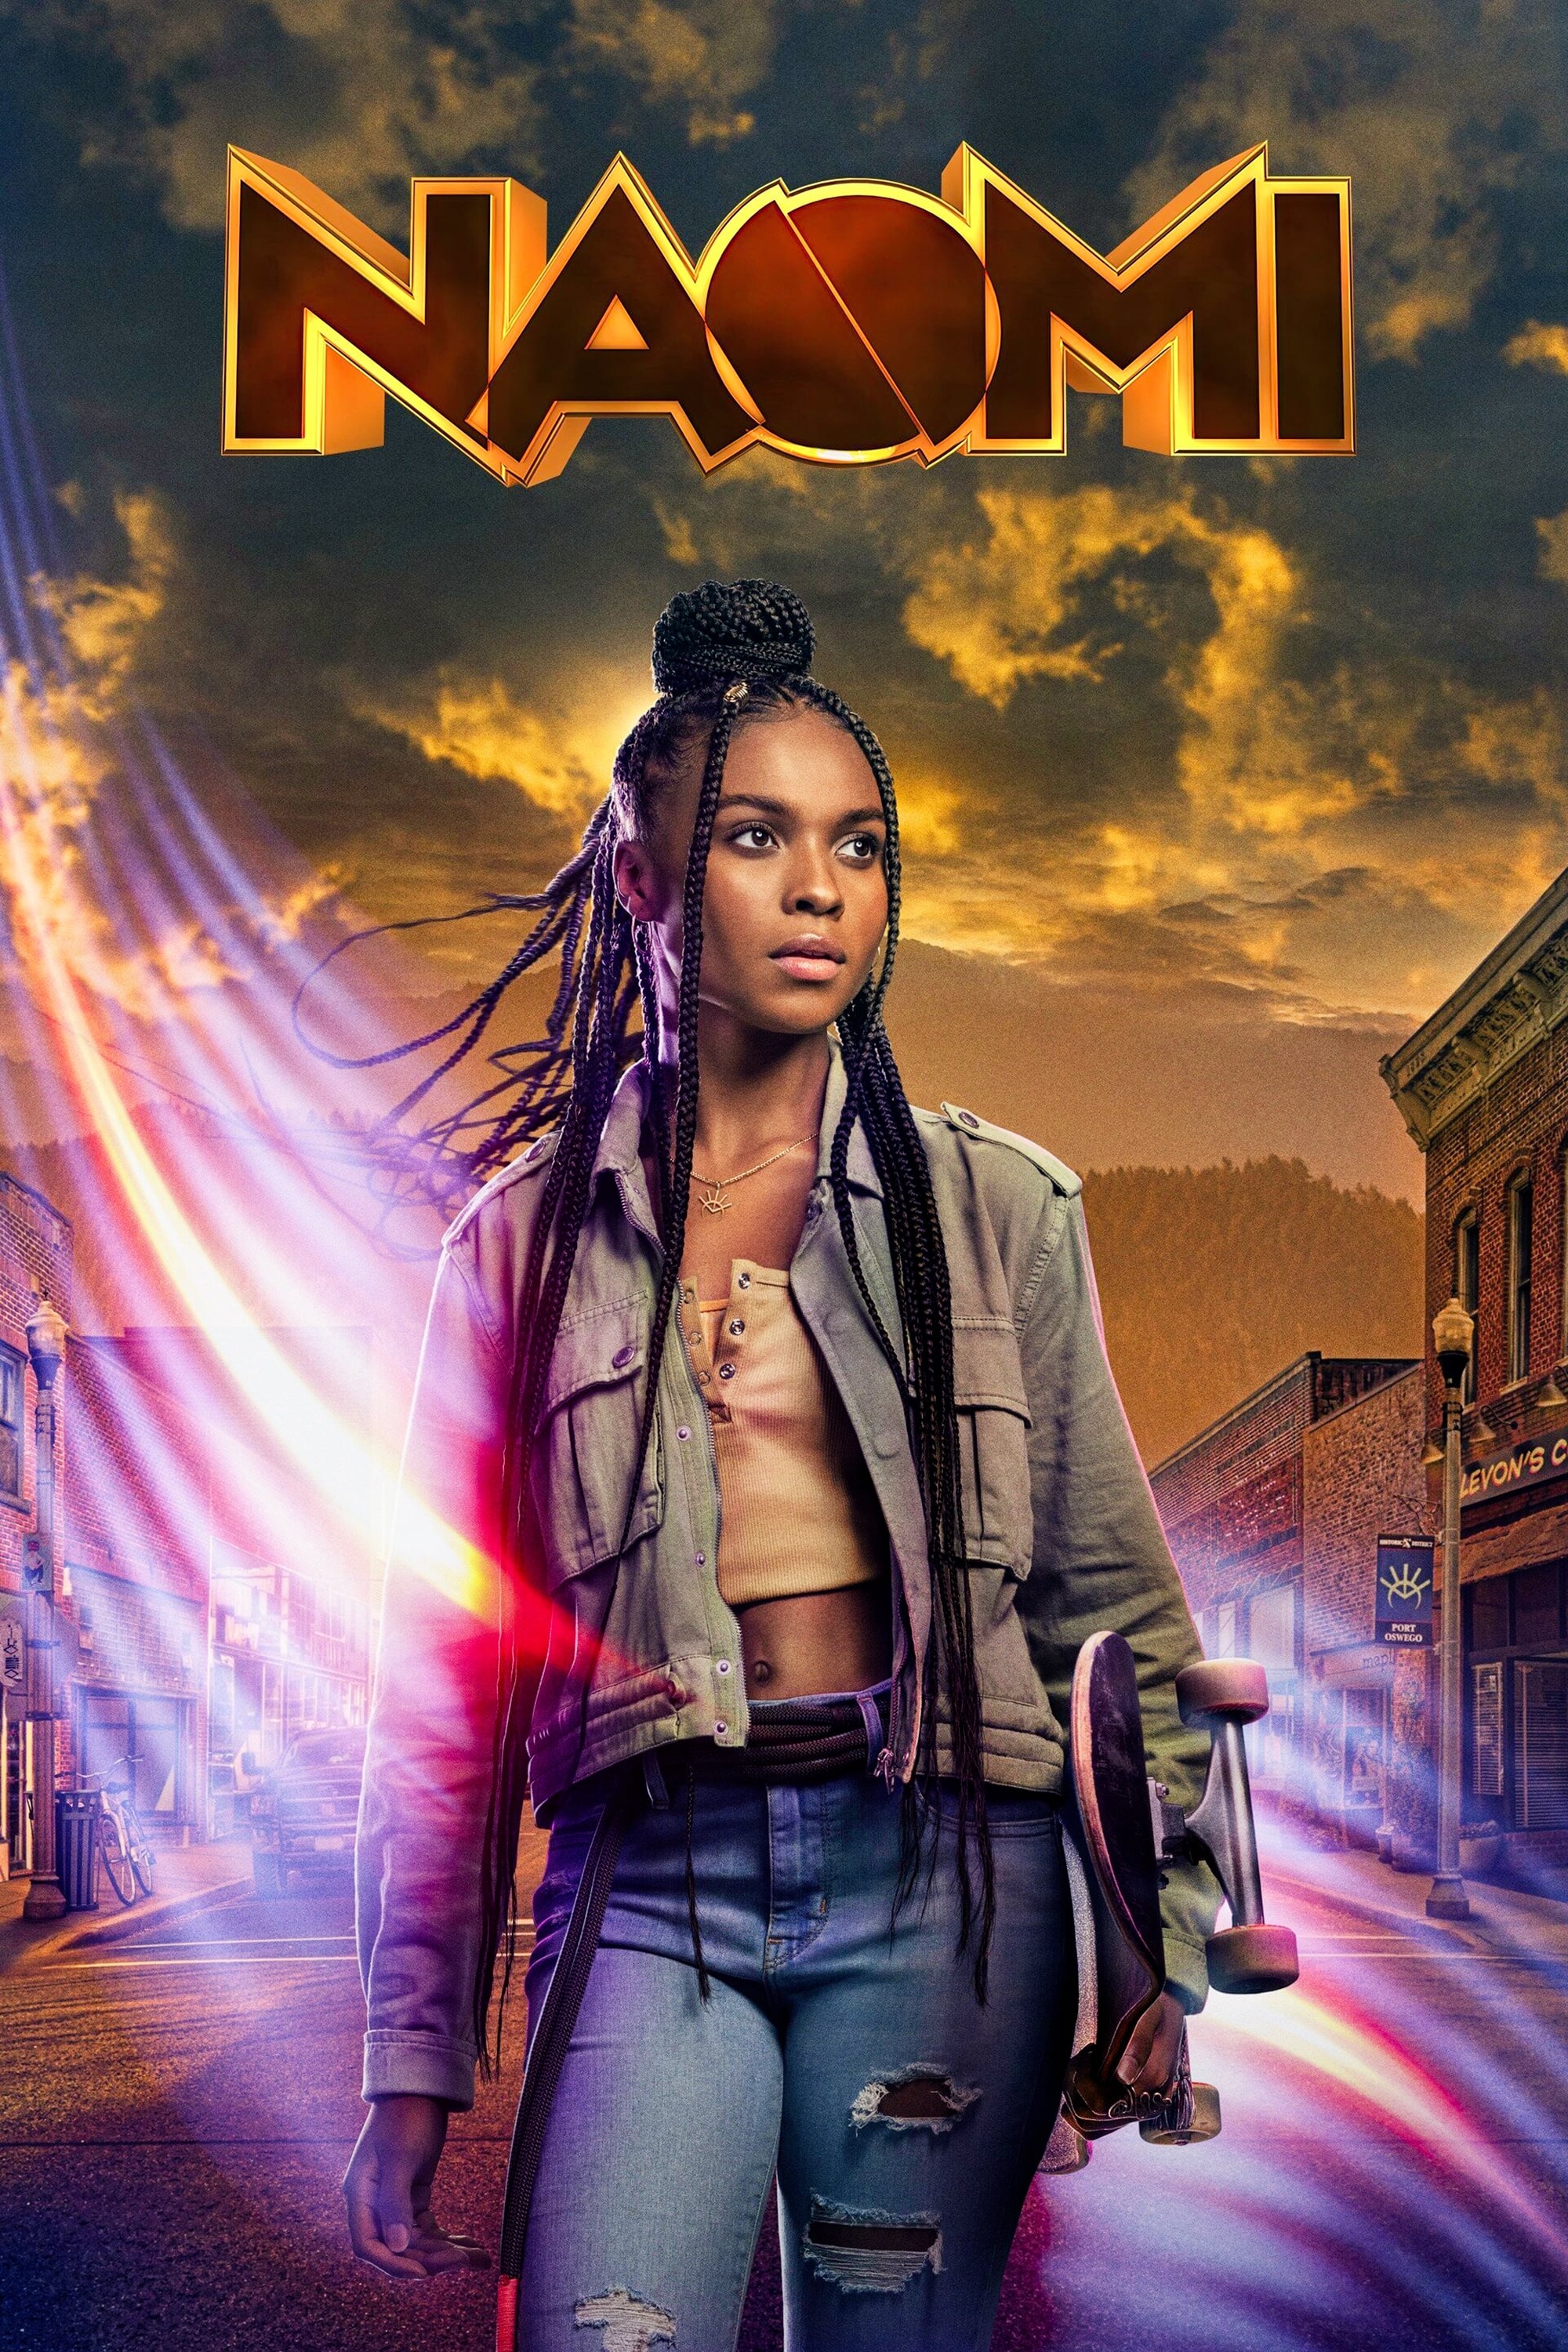 Naomi TV Shows About Based On Comic